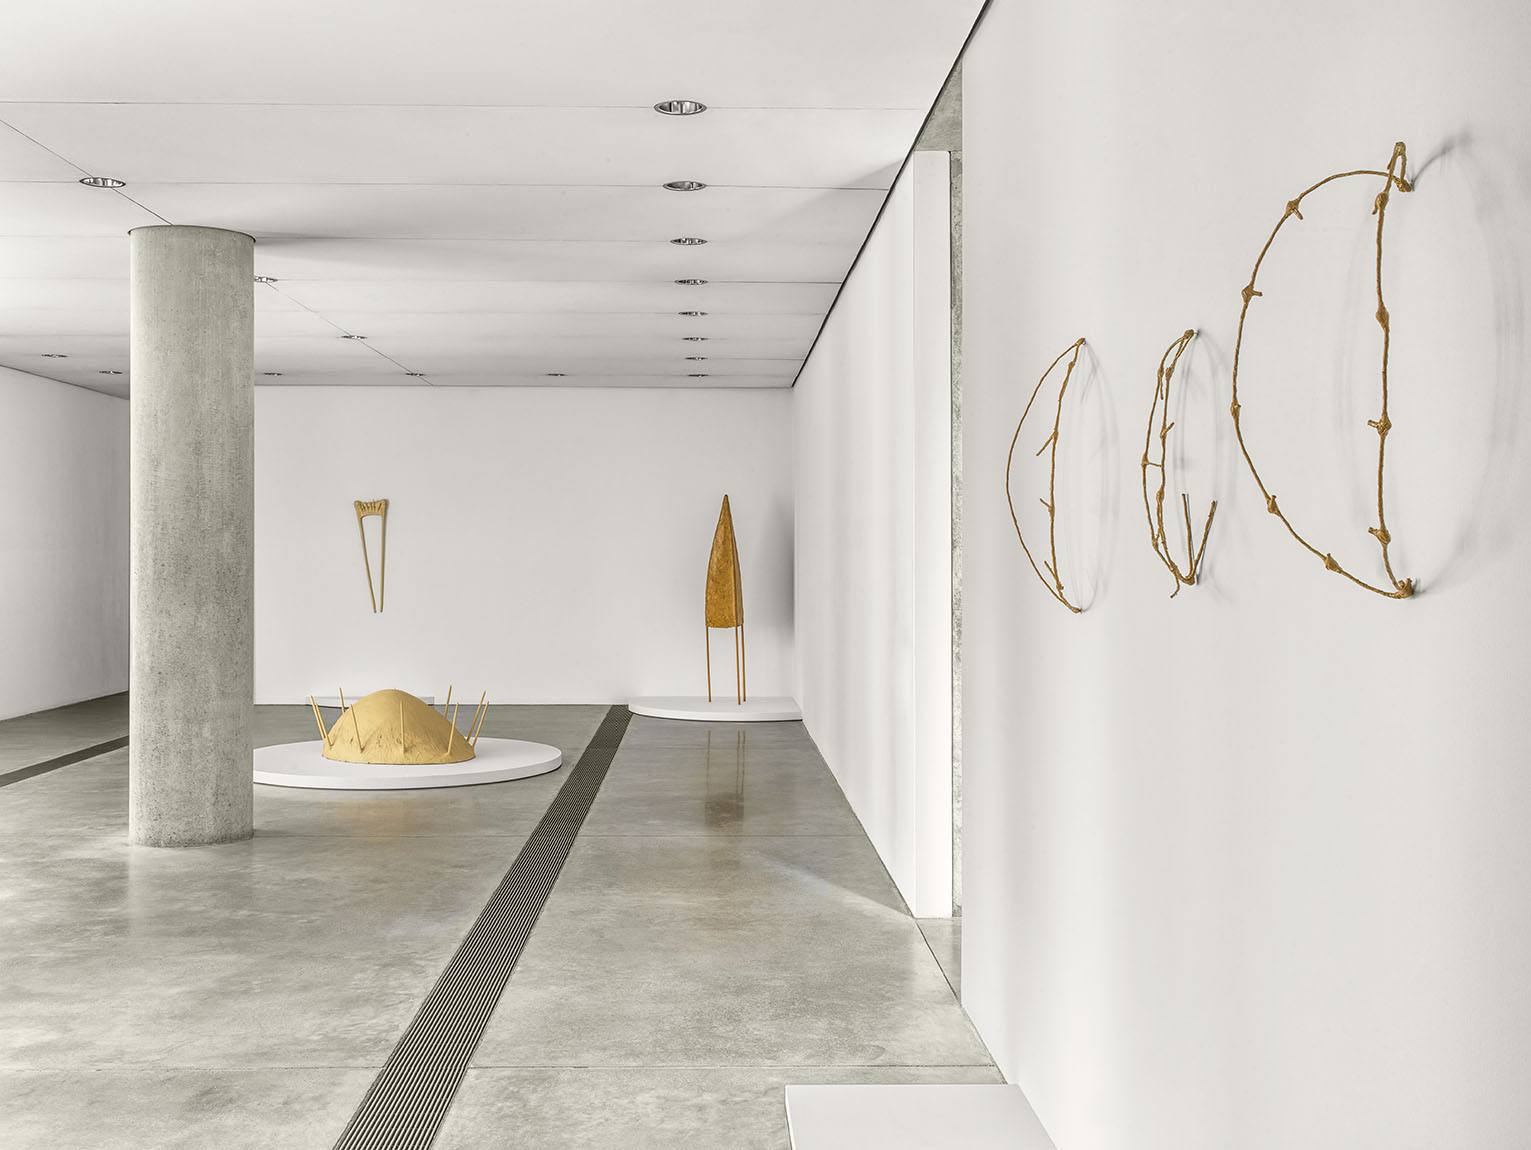 Installation view of Faye HeavyShield's work, including three yellow wired ochre traps on the wall to the right, a cone shaped paper mache sculpture and a sculpture in the form of a pregnant belly with spikes coming out, on the gallery floor.